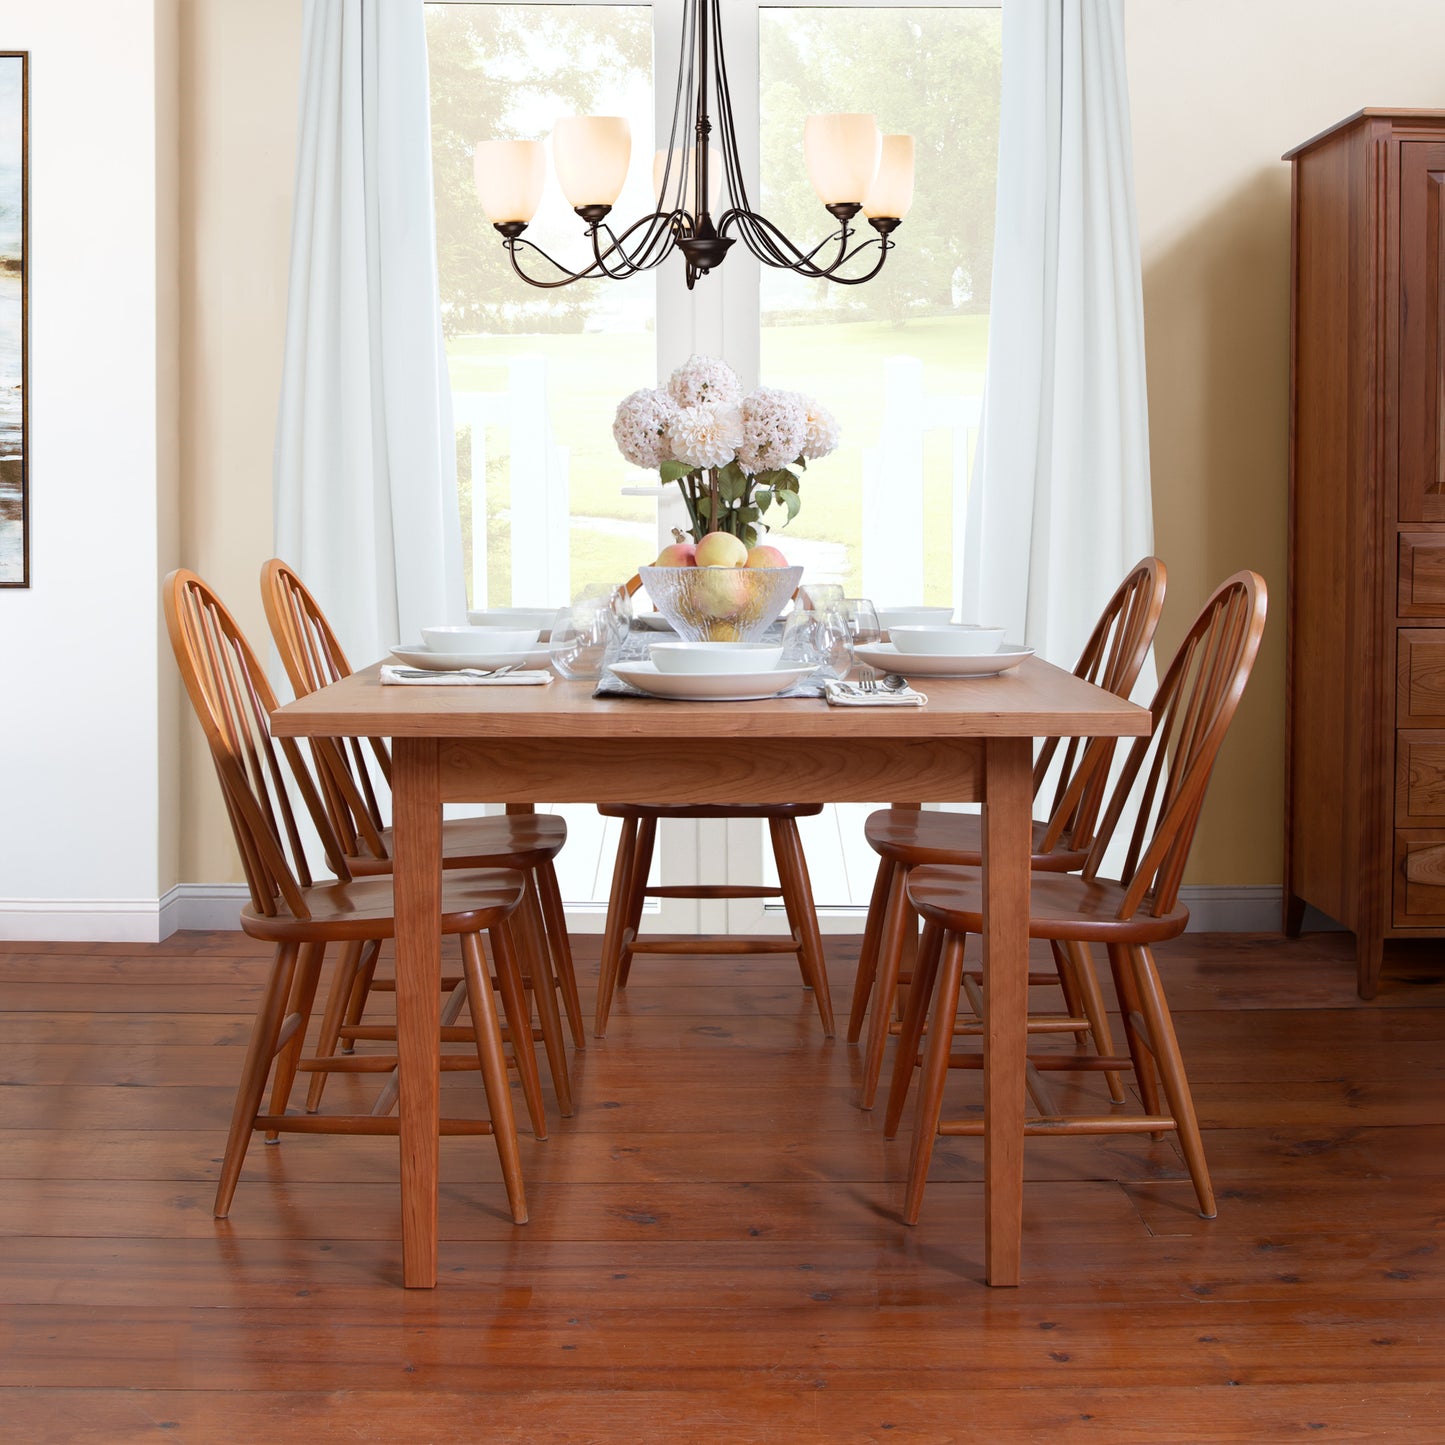 A dining room with a Maple Corner Woodworks Vermont Shaker Solid Top Harvest Table set for four, wooden chairs, a fruit centerpiece, and a chandelier above. The room has hardwood floors, light blue curtains, and a